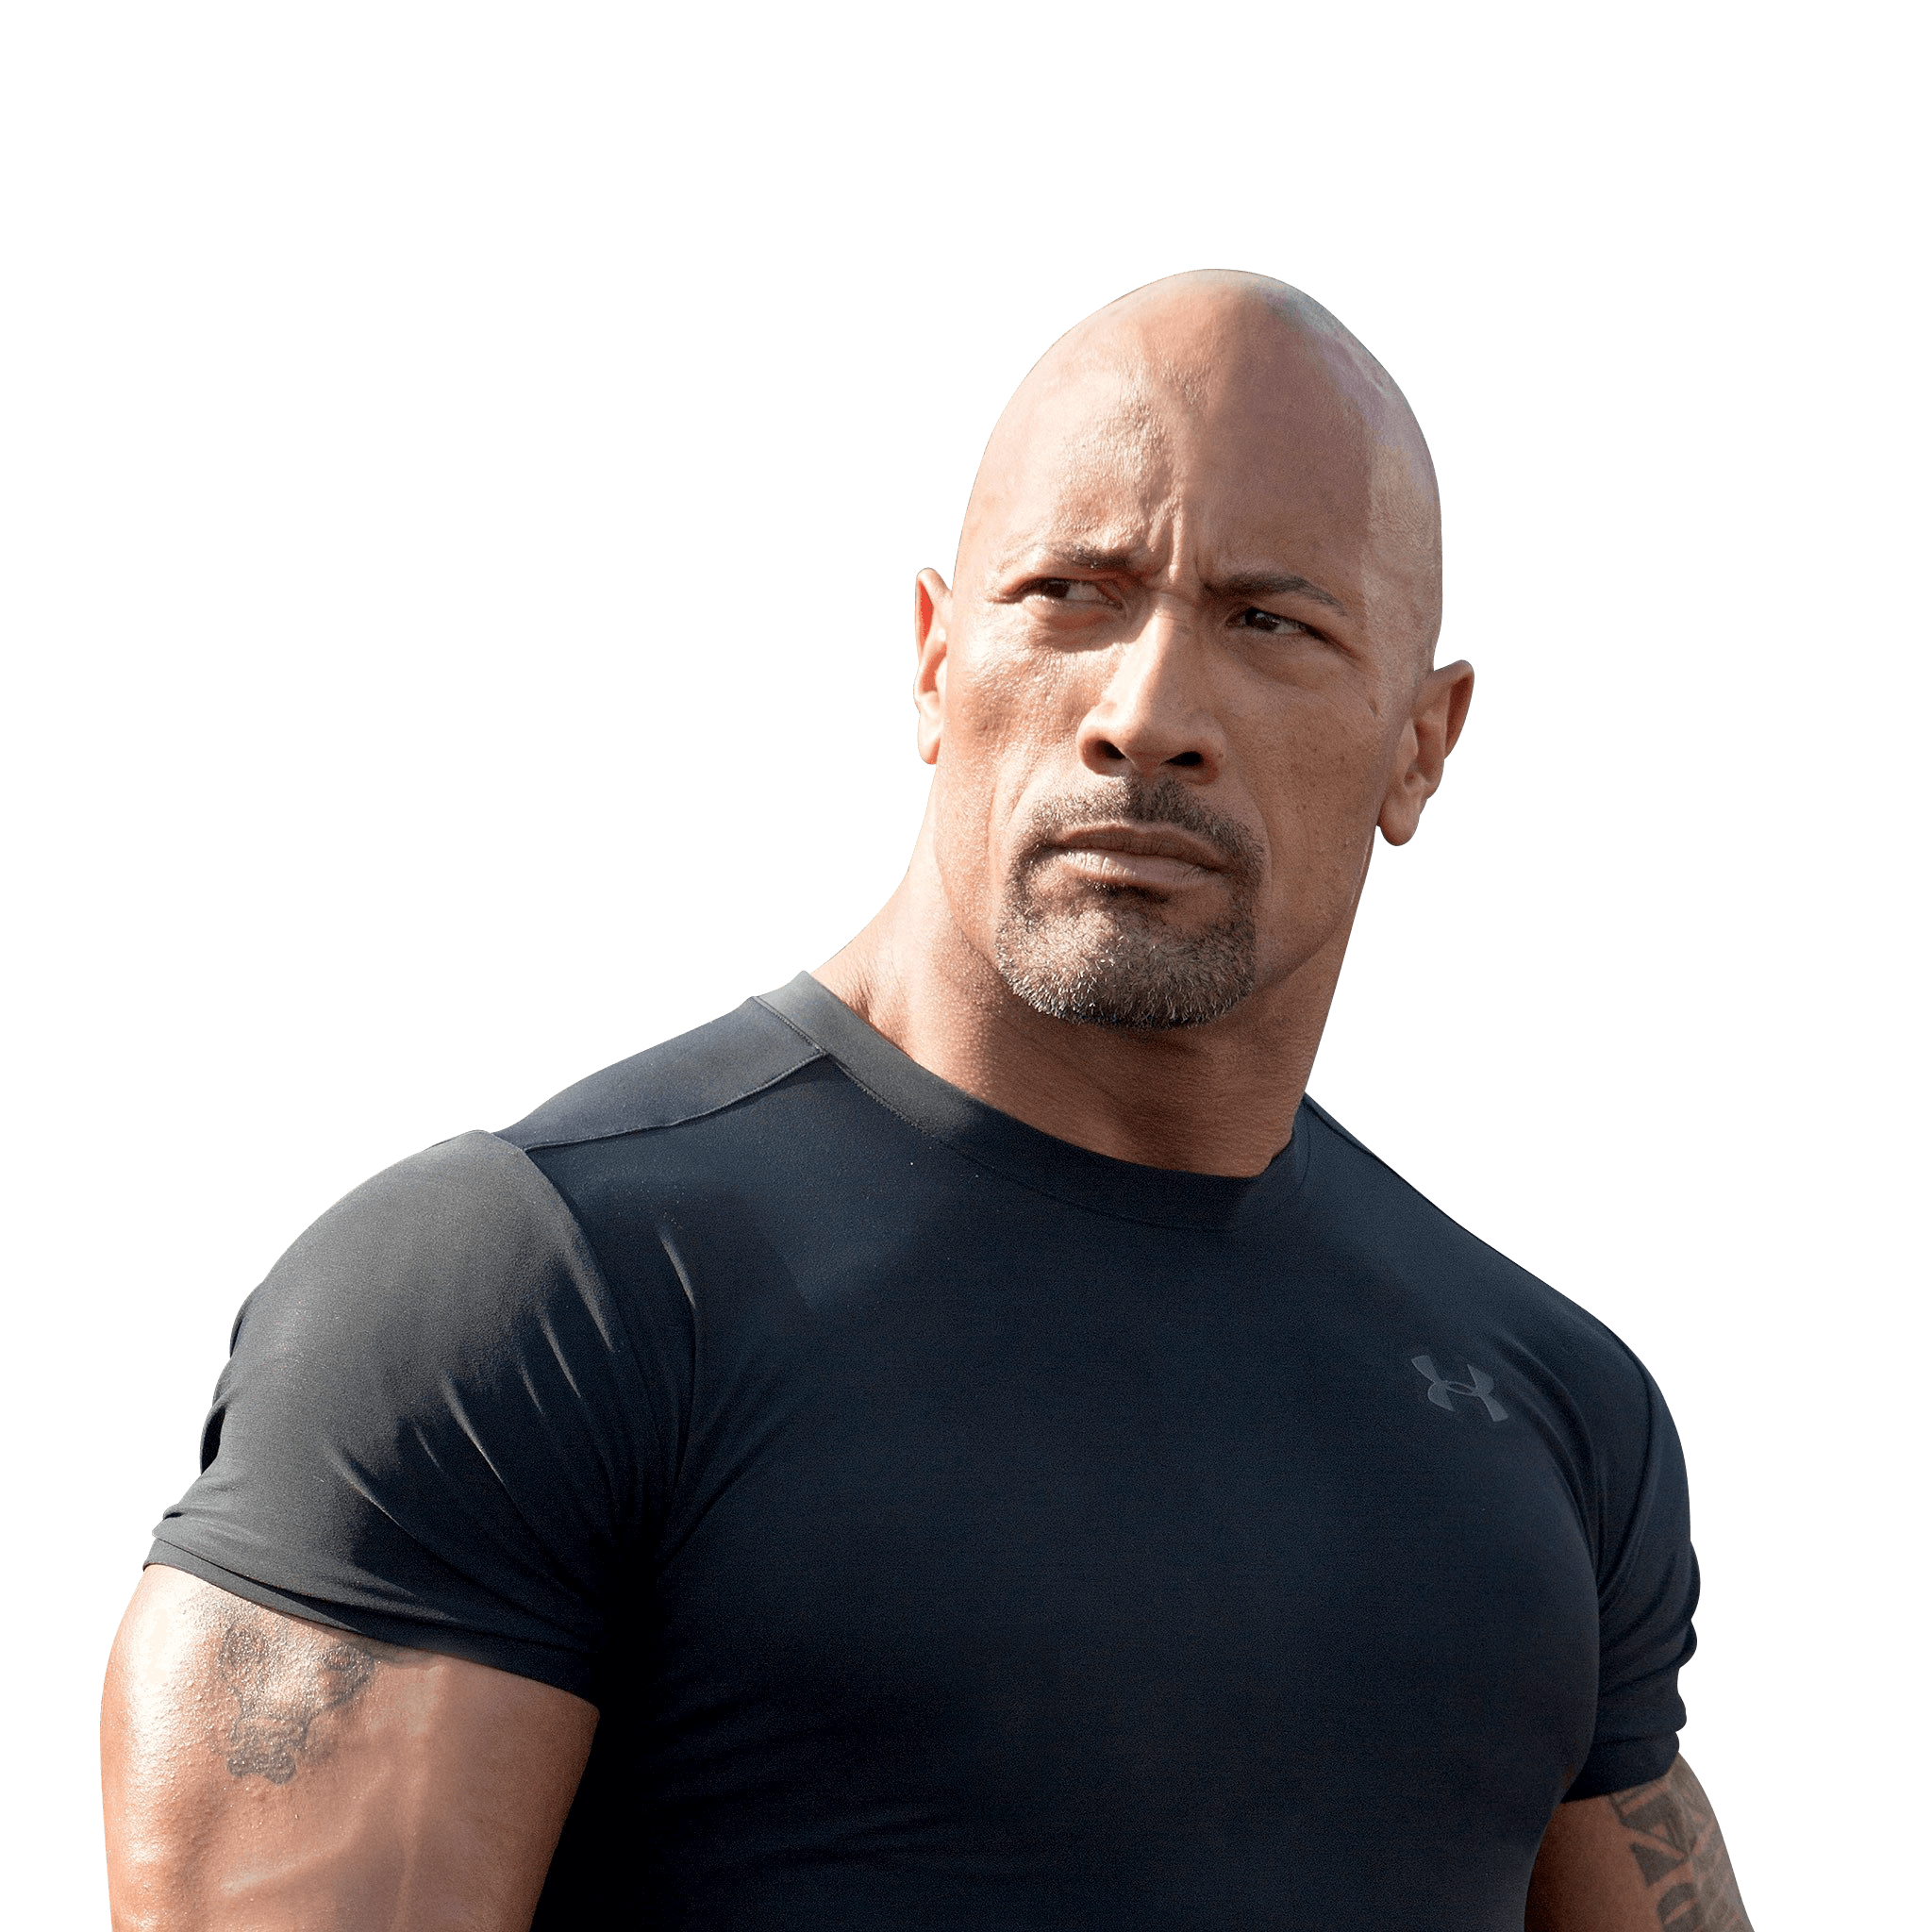 The Rock PNG Image File